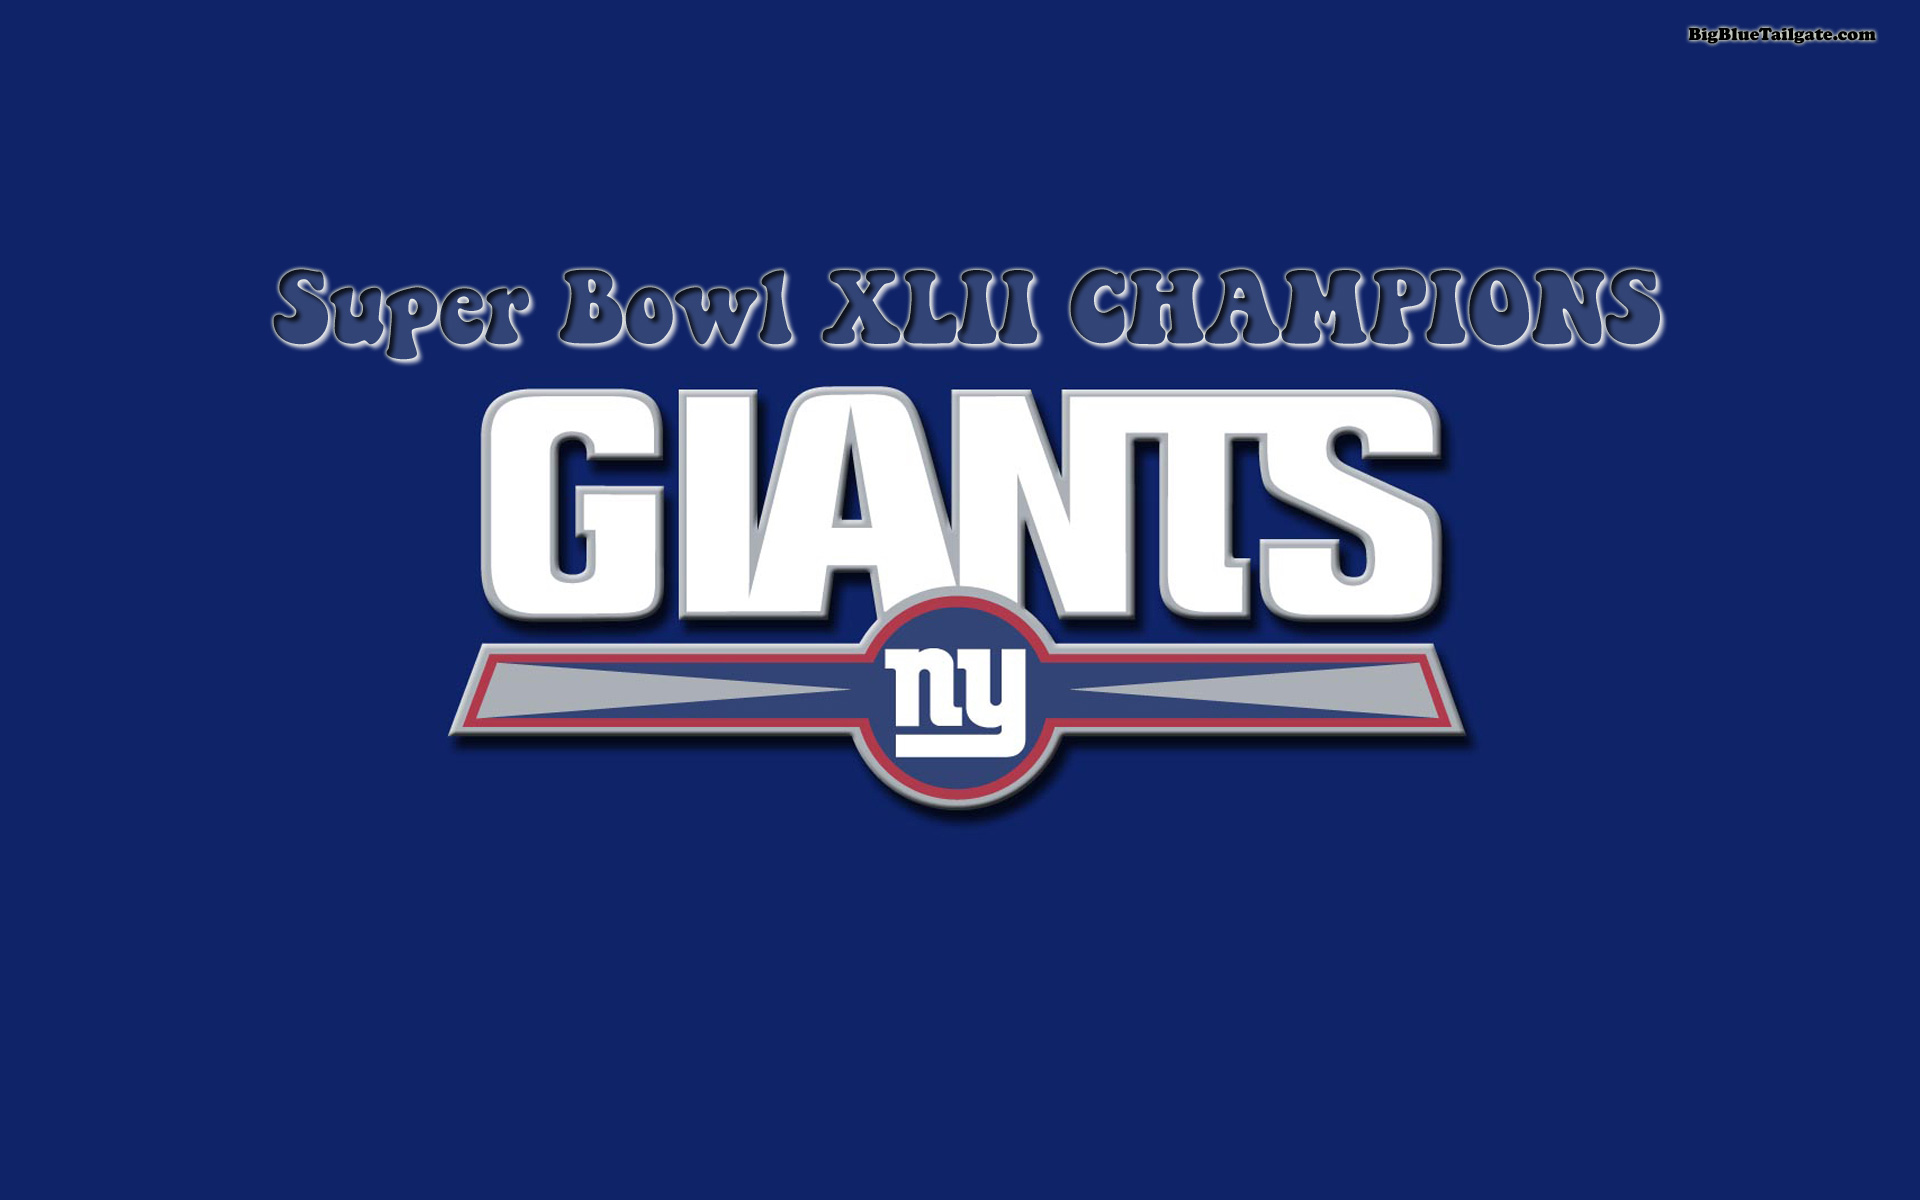 If you are looking for New York Giants images today is your lucky day 1920x1200